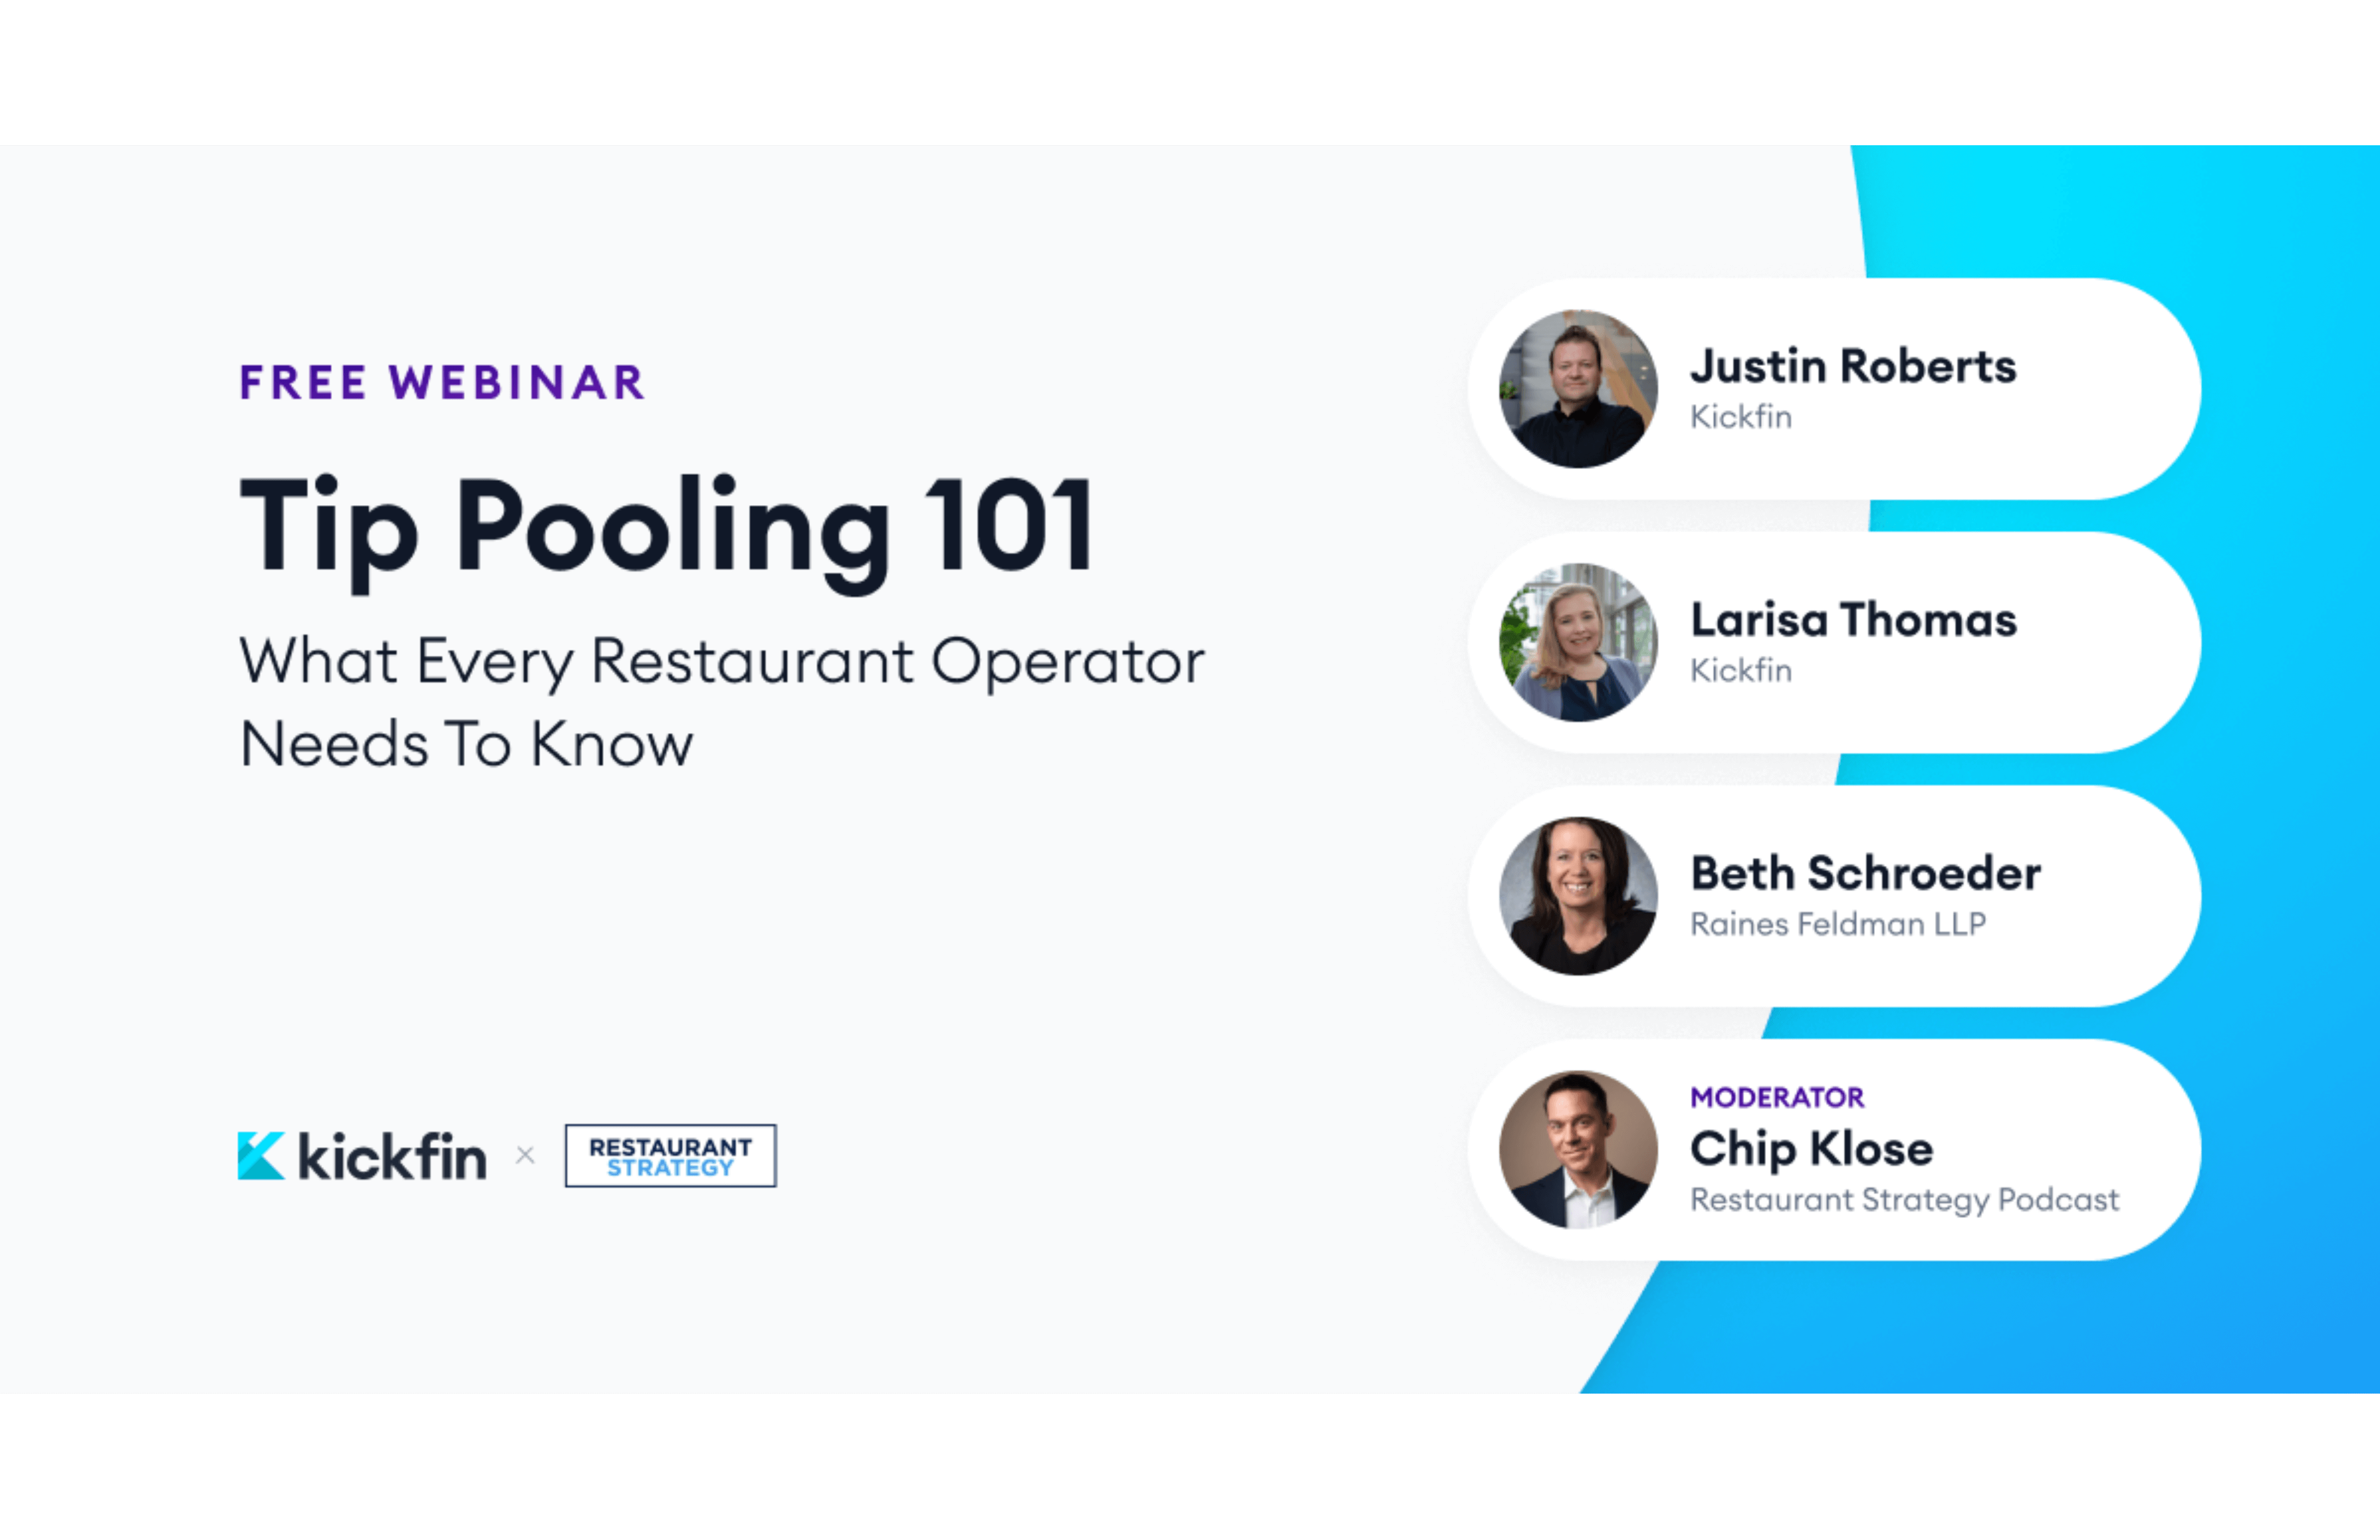 [WEBINAR] A Tip Pooling “Deep Dive” with Restaurant Strategy Podcast Host Chip Klose